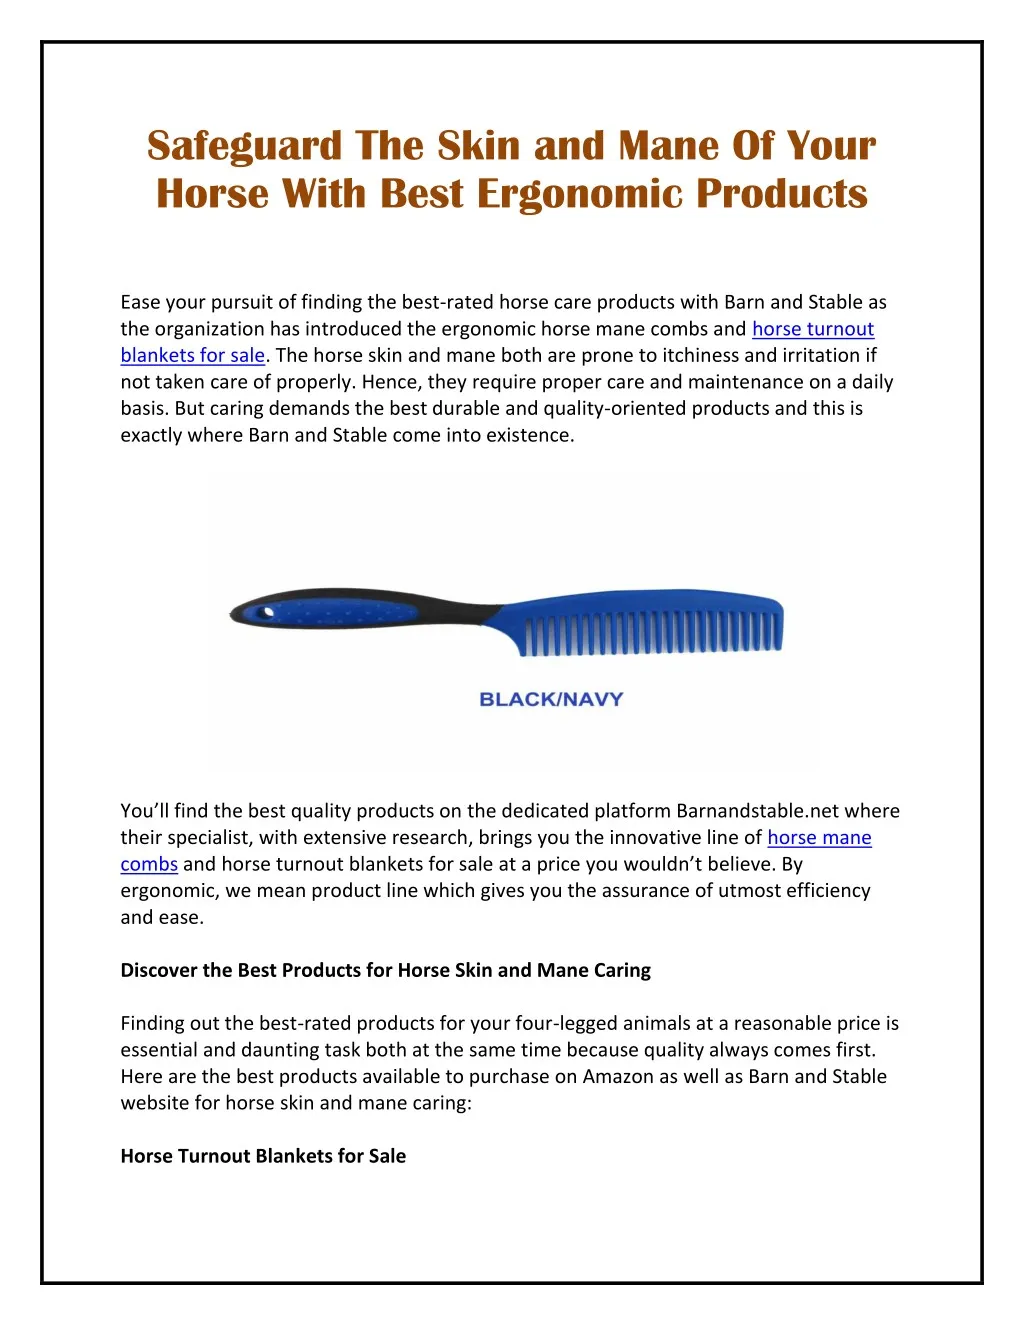 safeguard the skin and mane of your horse with